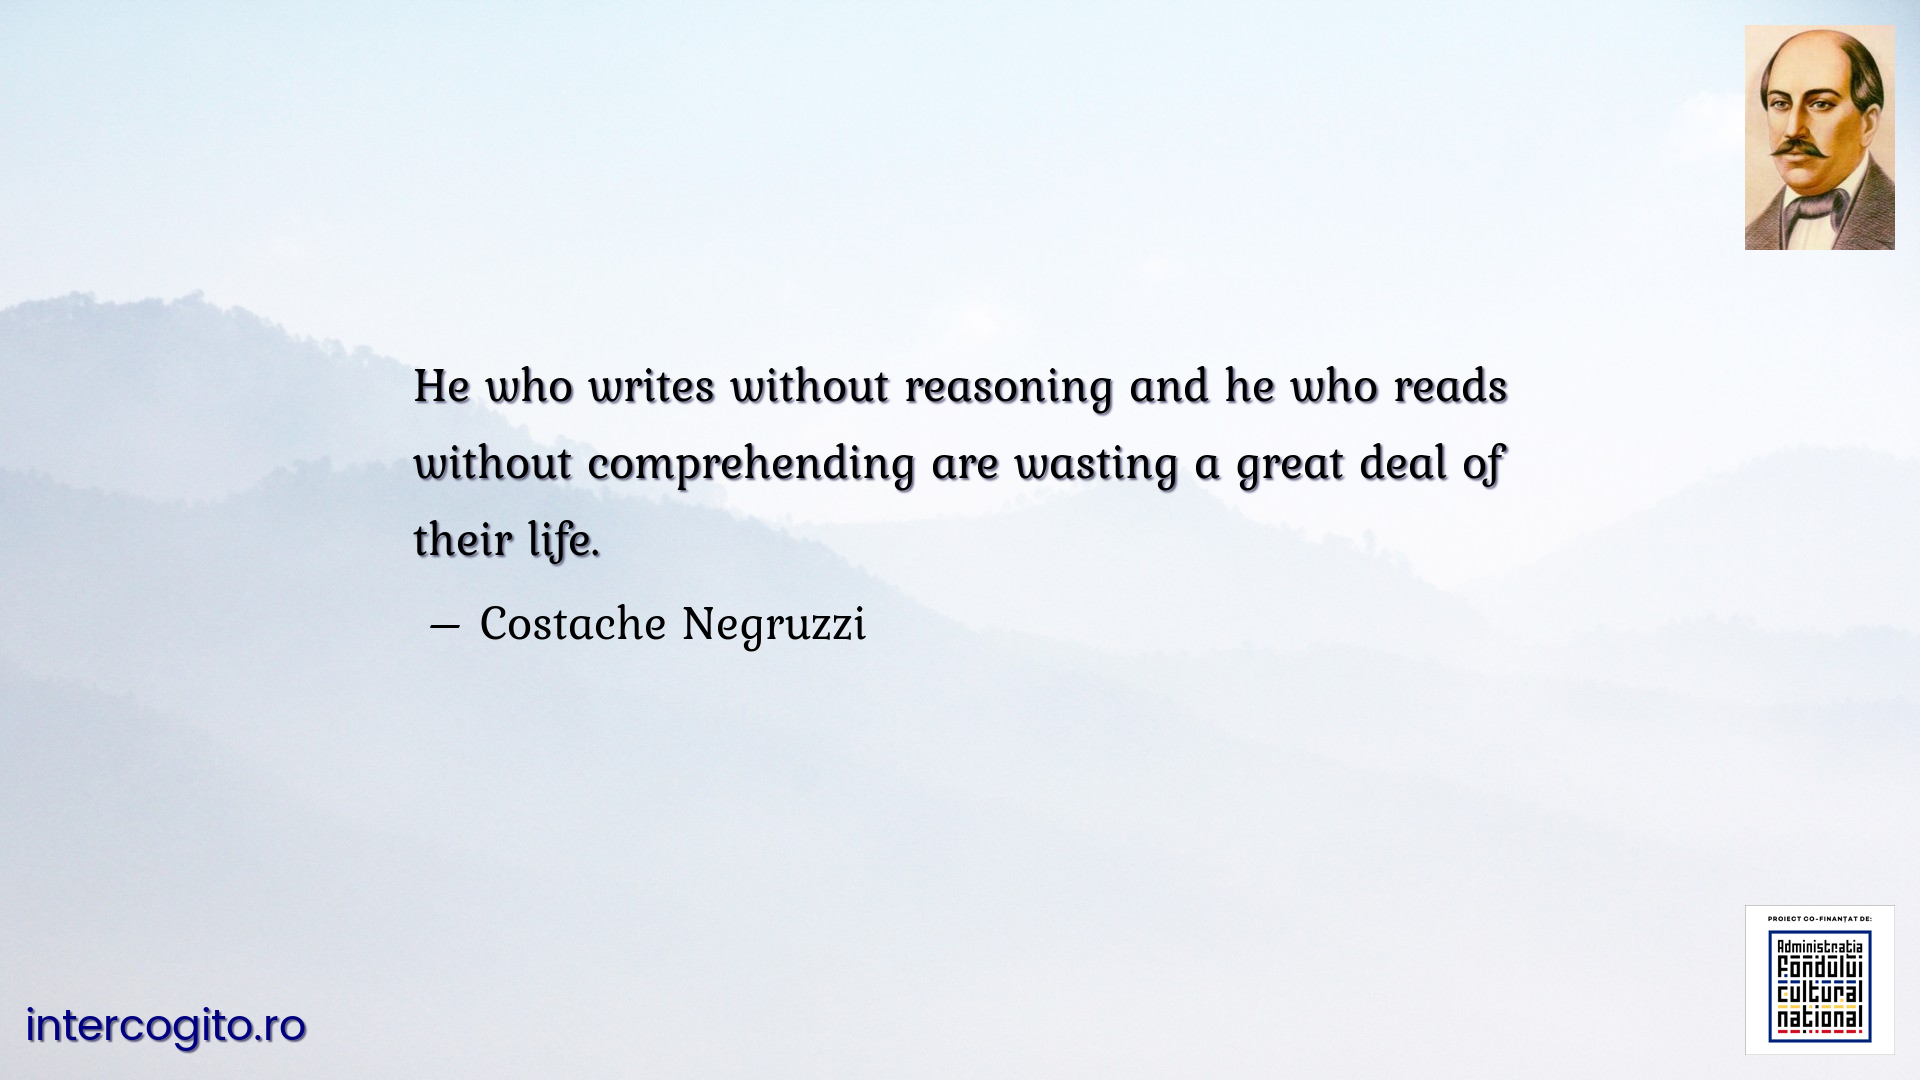 He who writes without reasoning and he who reads without comprehending are wasting a great deal of their life.